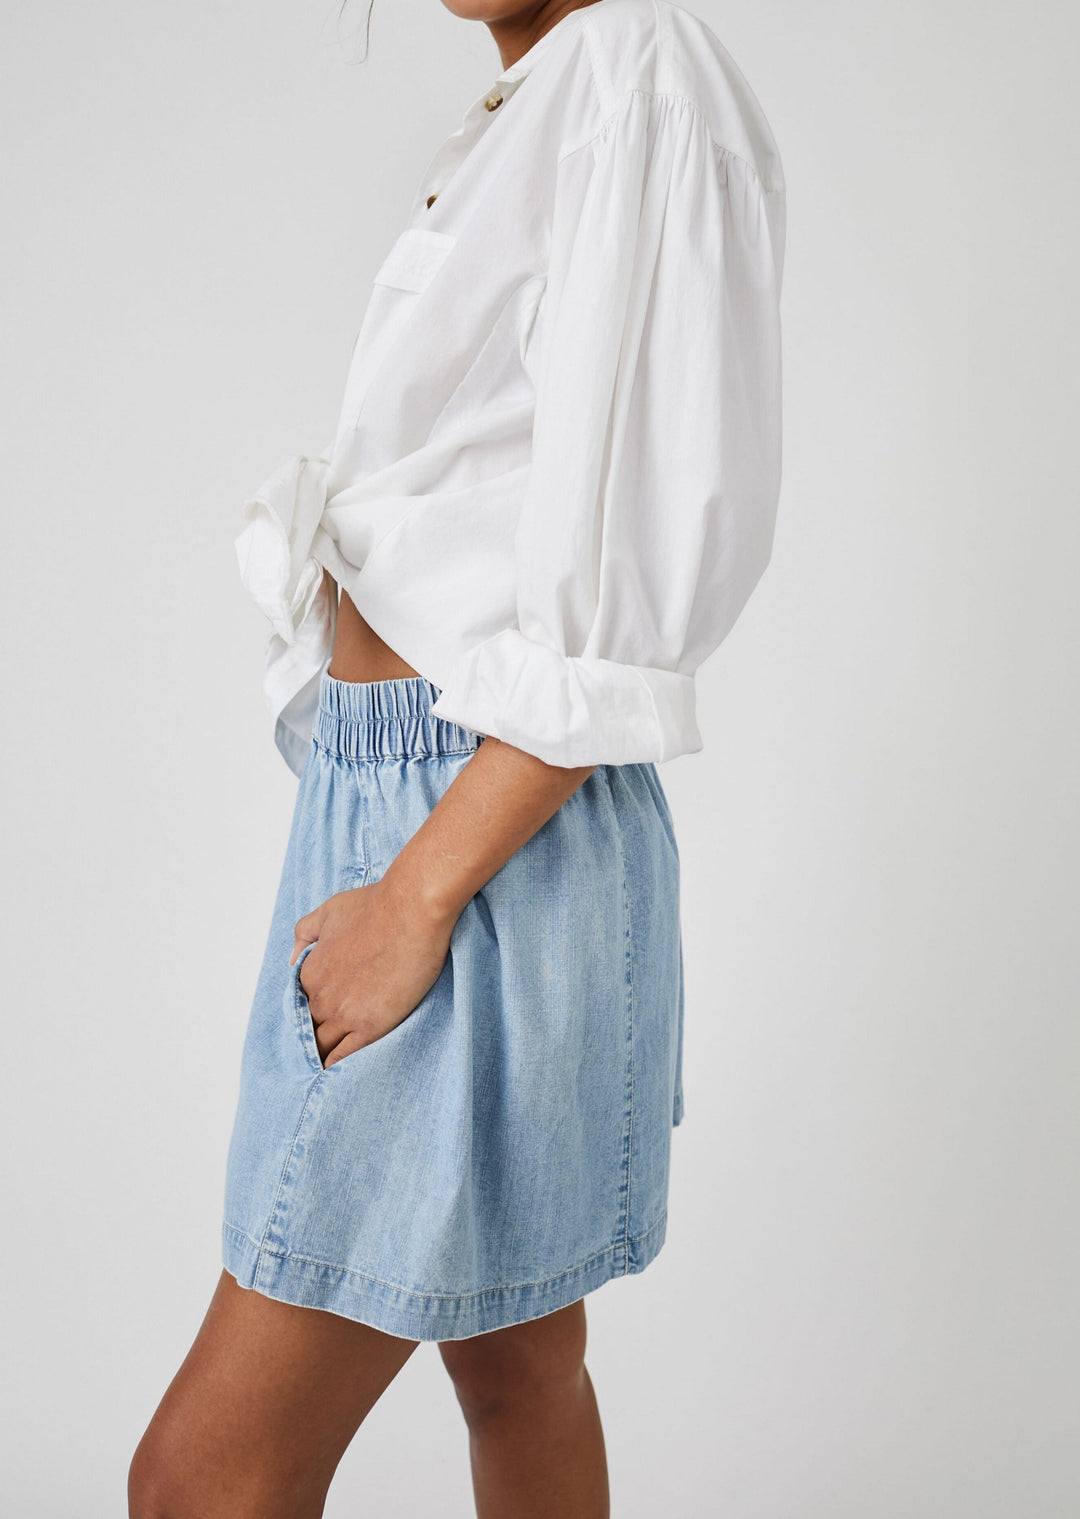 GET FREE CHAMBRAY SHORTS - LADY LIBERTY - Kingfisher Road - Online Boutique